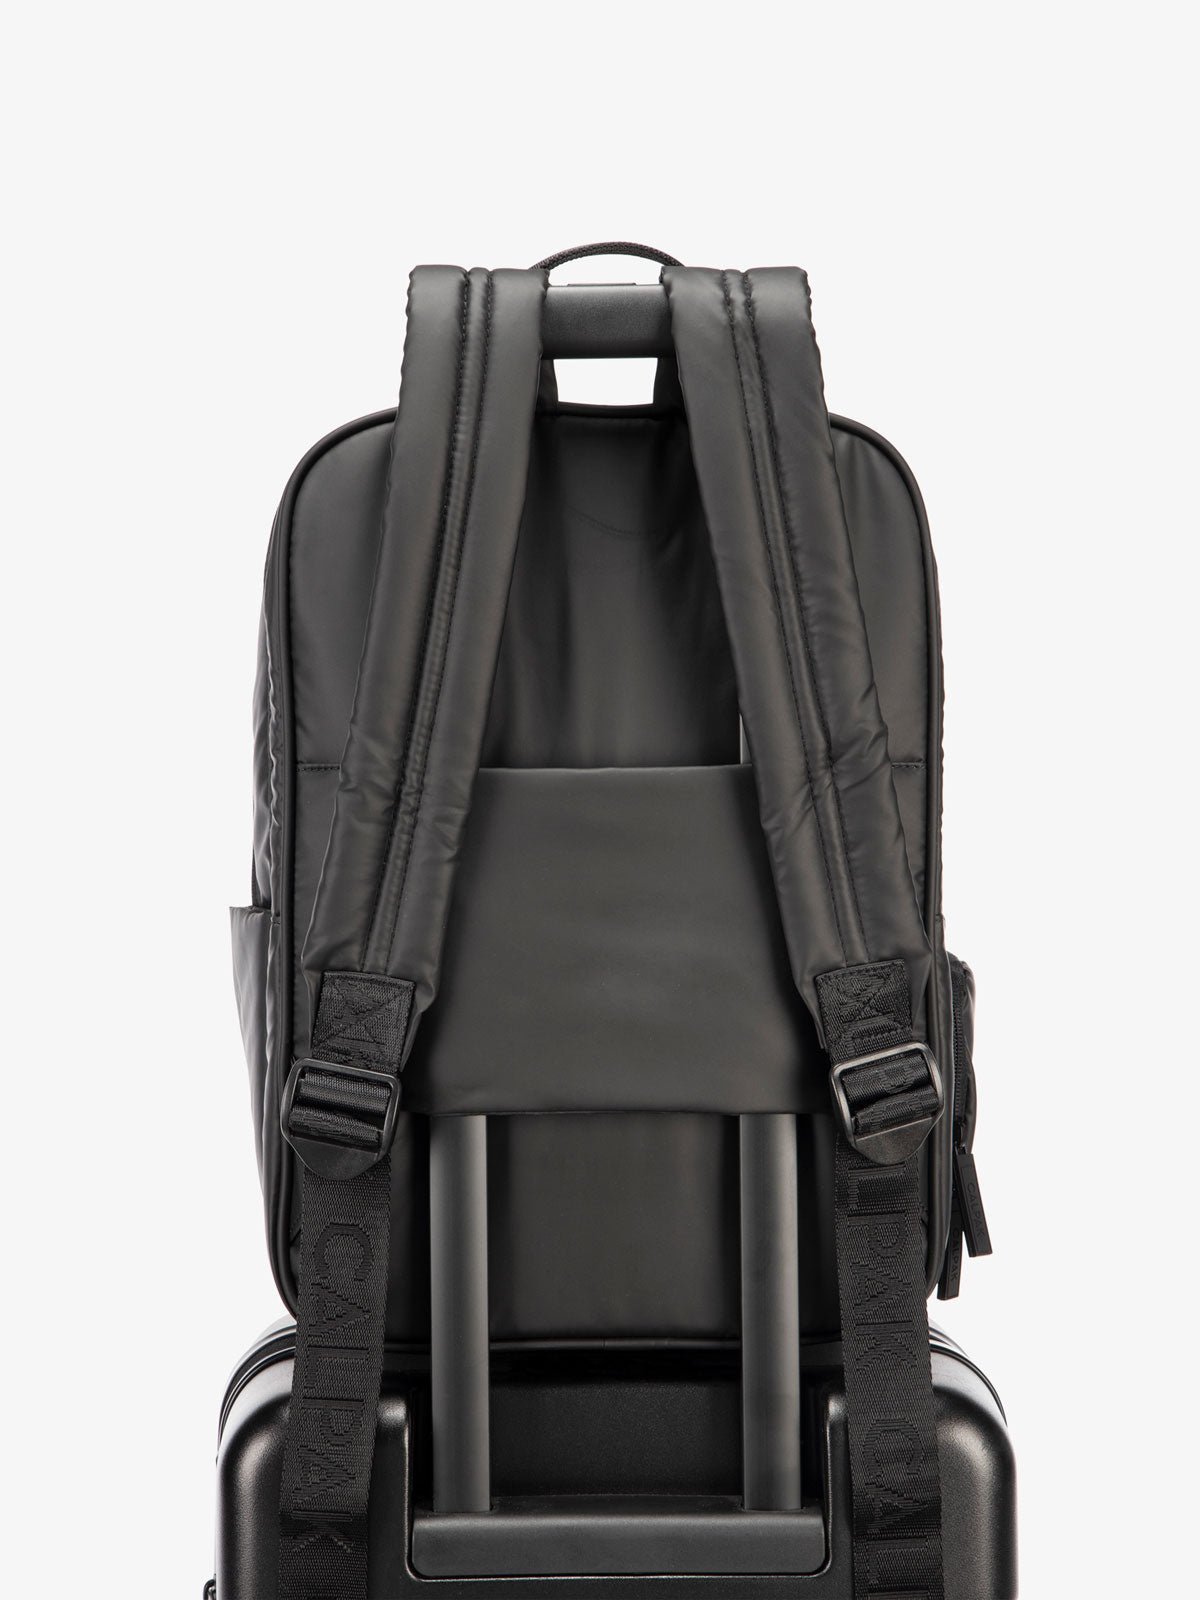 This Travel Backpack Is on Sale for $34